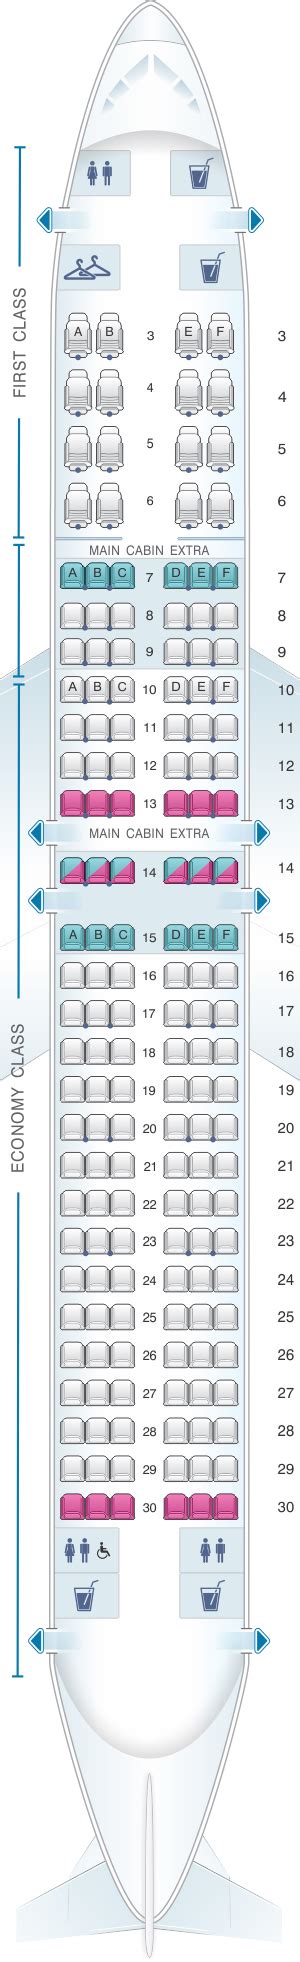 American airlines boeing 737-800 seating chart. Oct 12, 2020 ... American Airlines | AAdvantage - Boeing 737 ... Refitted Oasis Boeing 738 / 737-800 RC MiQ First / Business seat ... map several hours before ... 